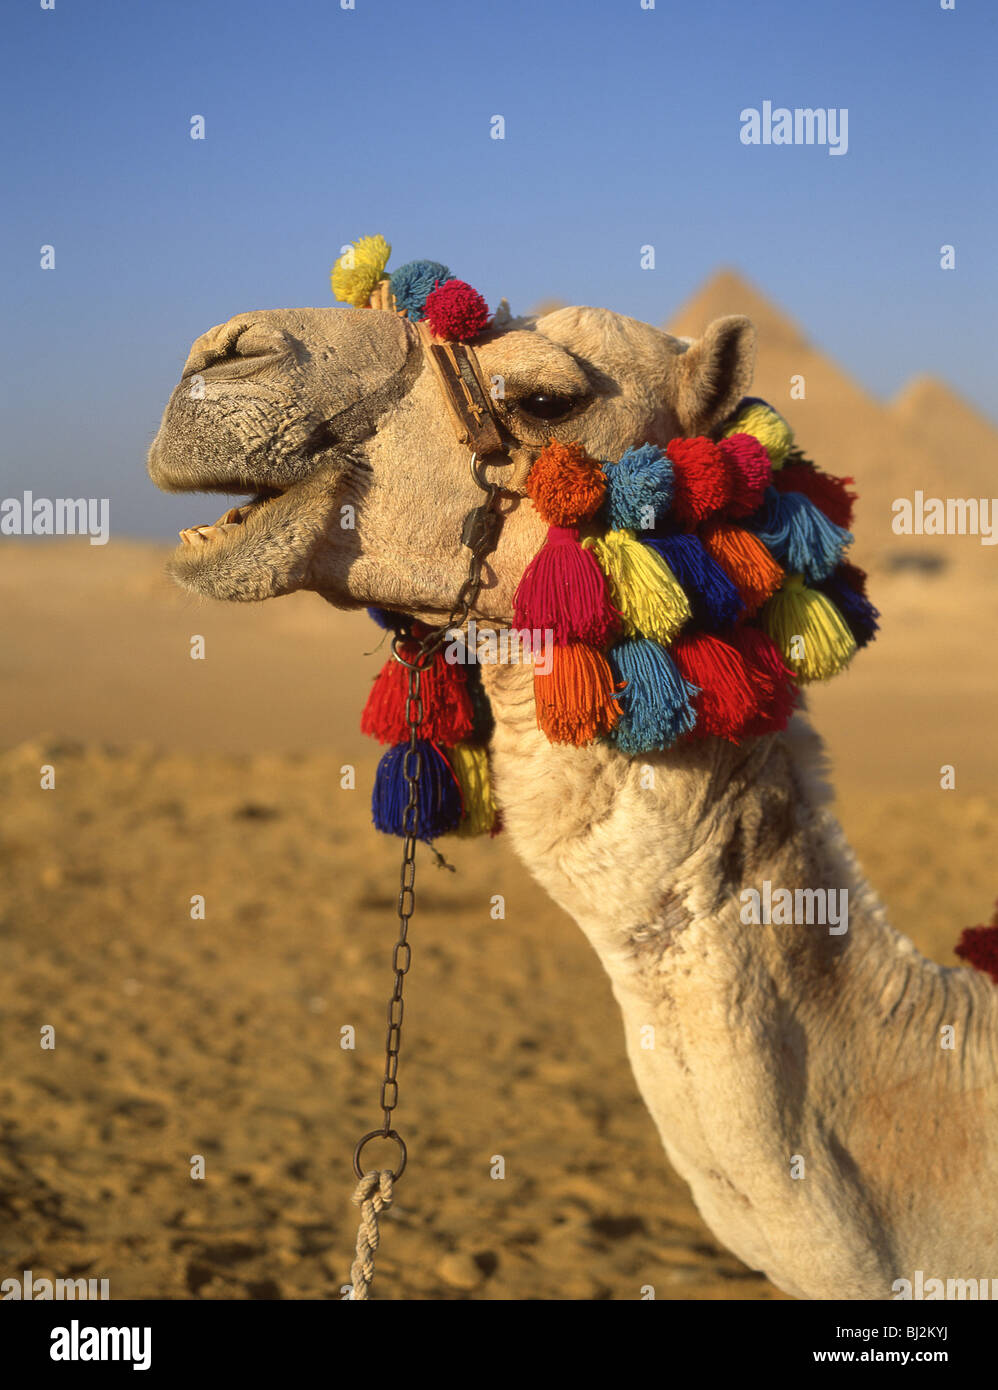 Camel with coloured tassels, The Great Pyramids of Giza, Giza, Giza Governate, Republic of Egypt Stock Photo